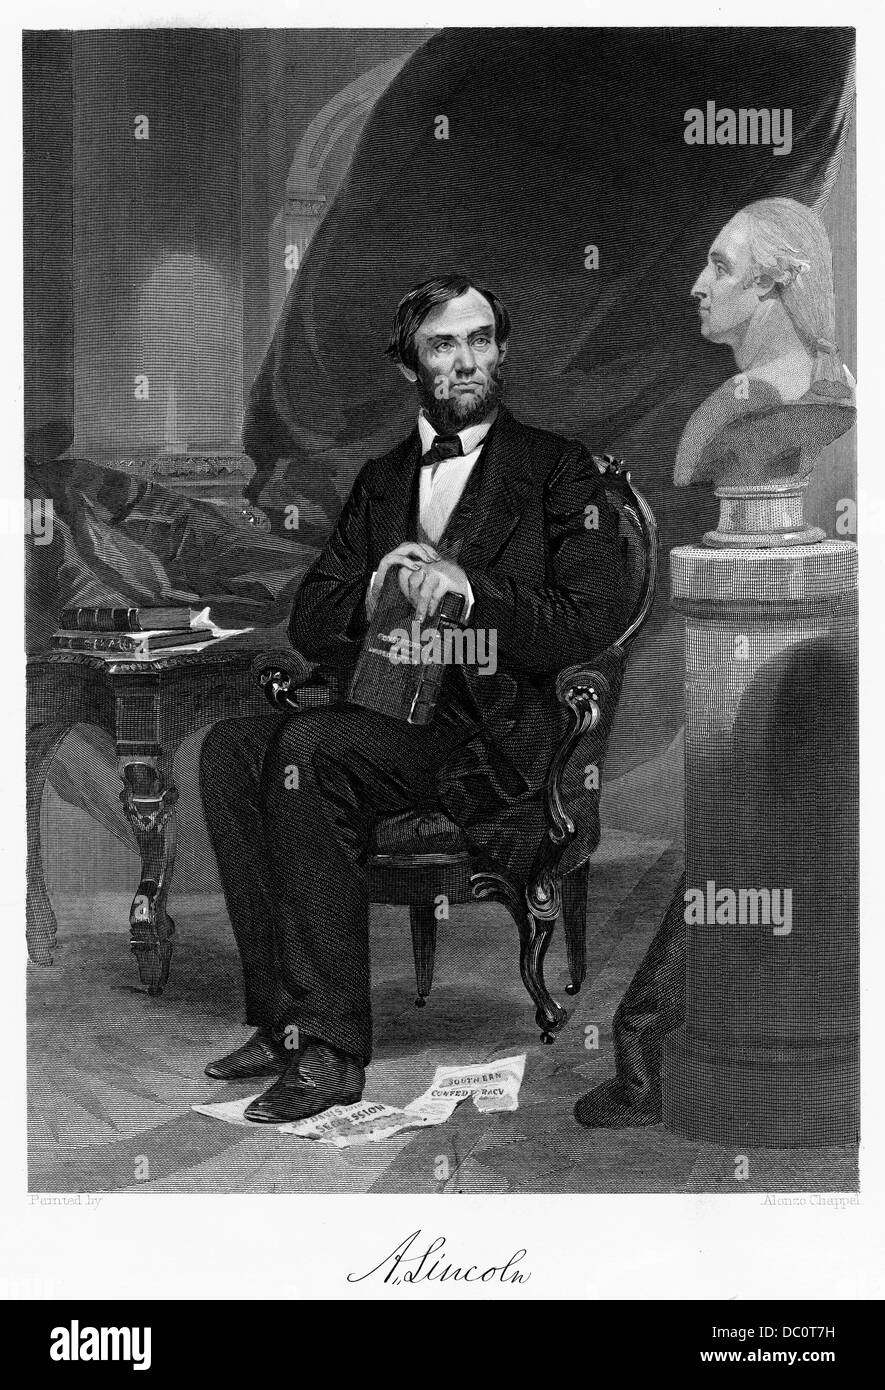 1800s 1860s SEATED PORTRAIT ABRAHAM LINCOLN WITH SIGNATURE Stock Photo